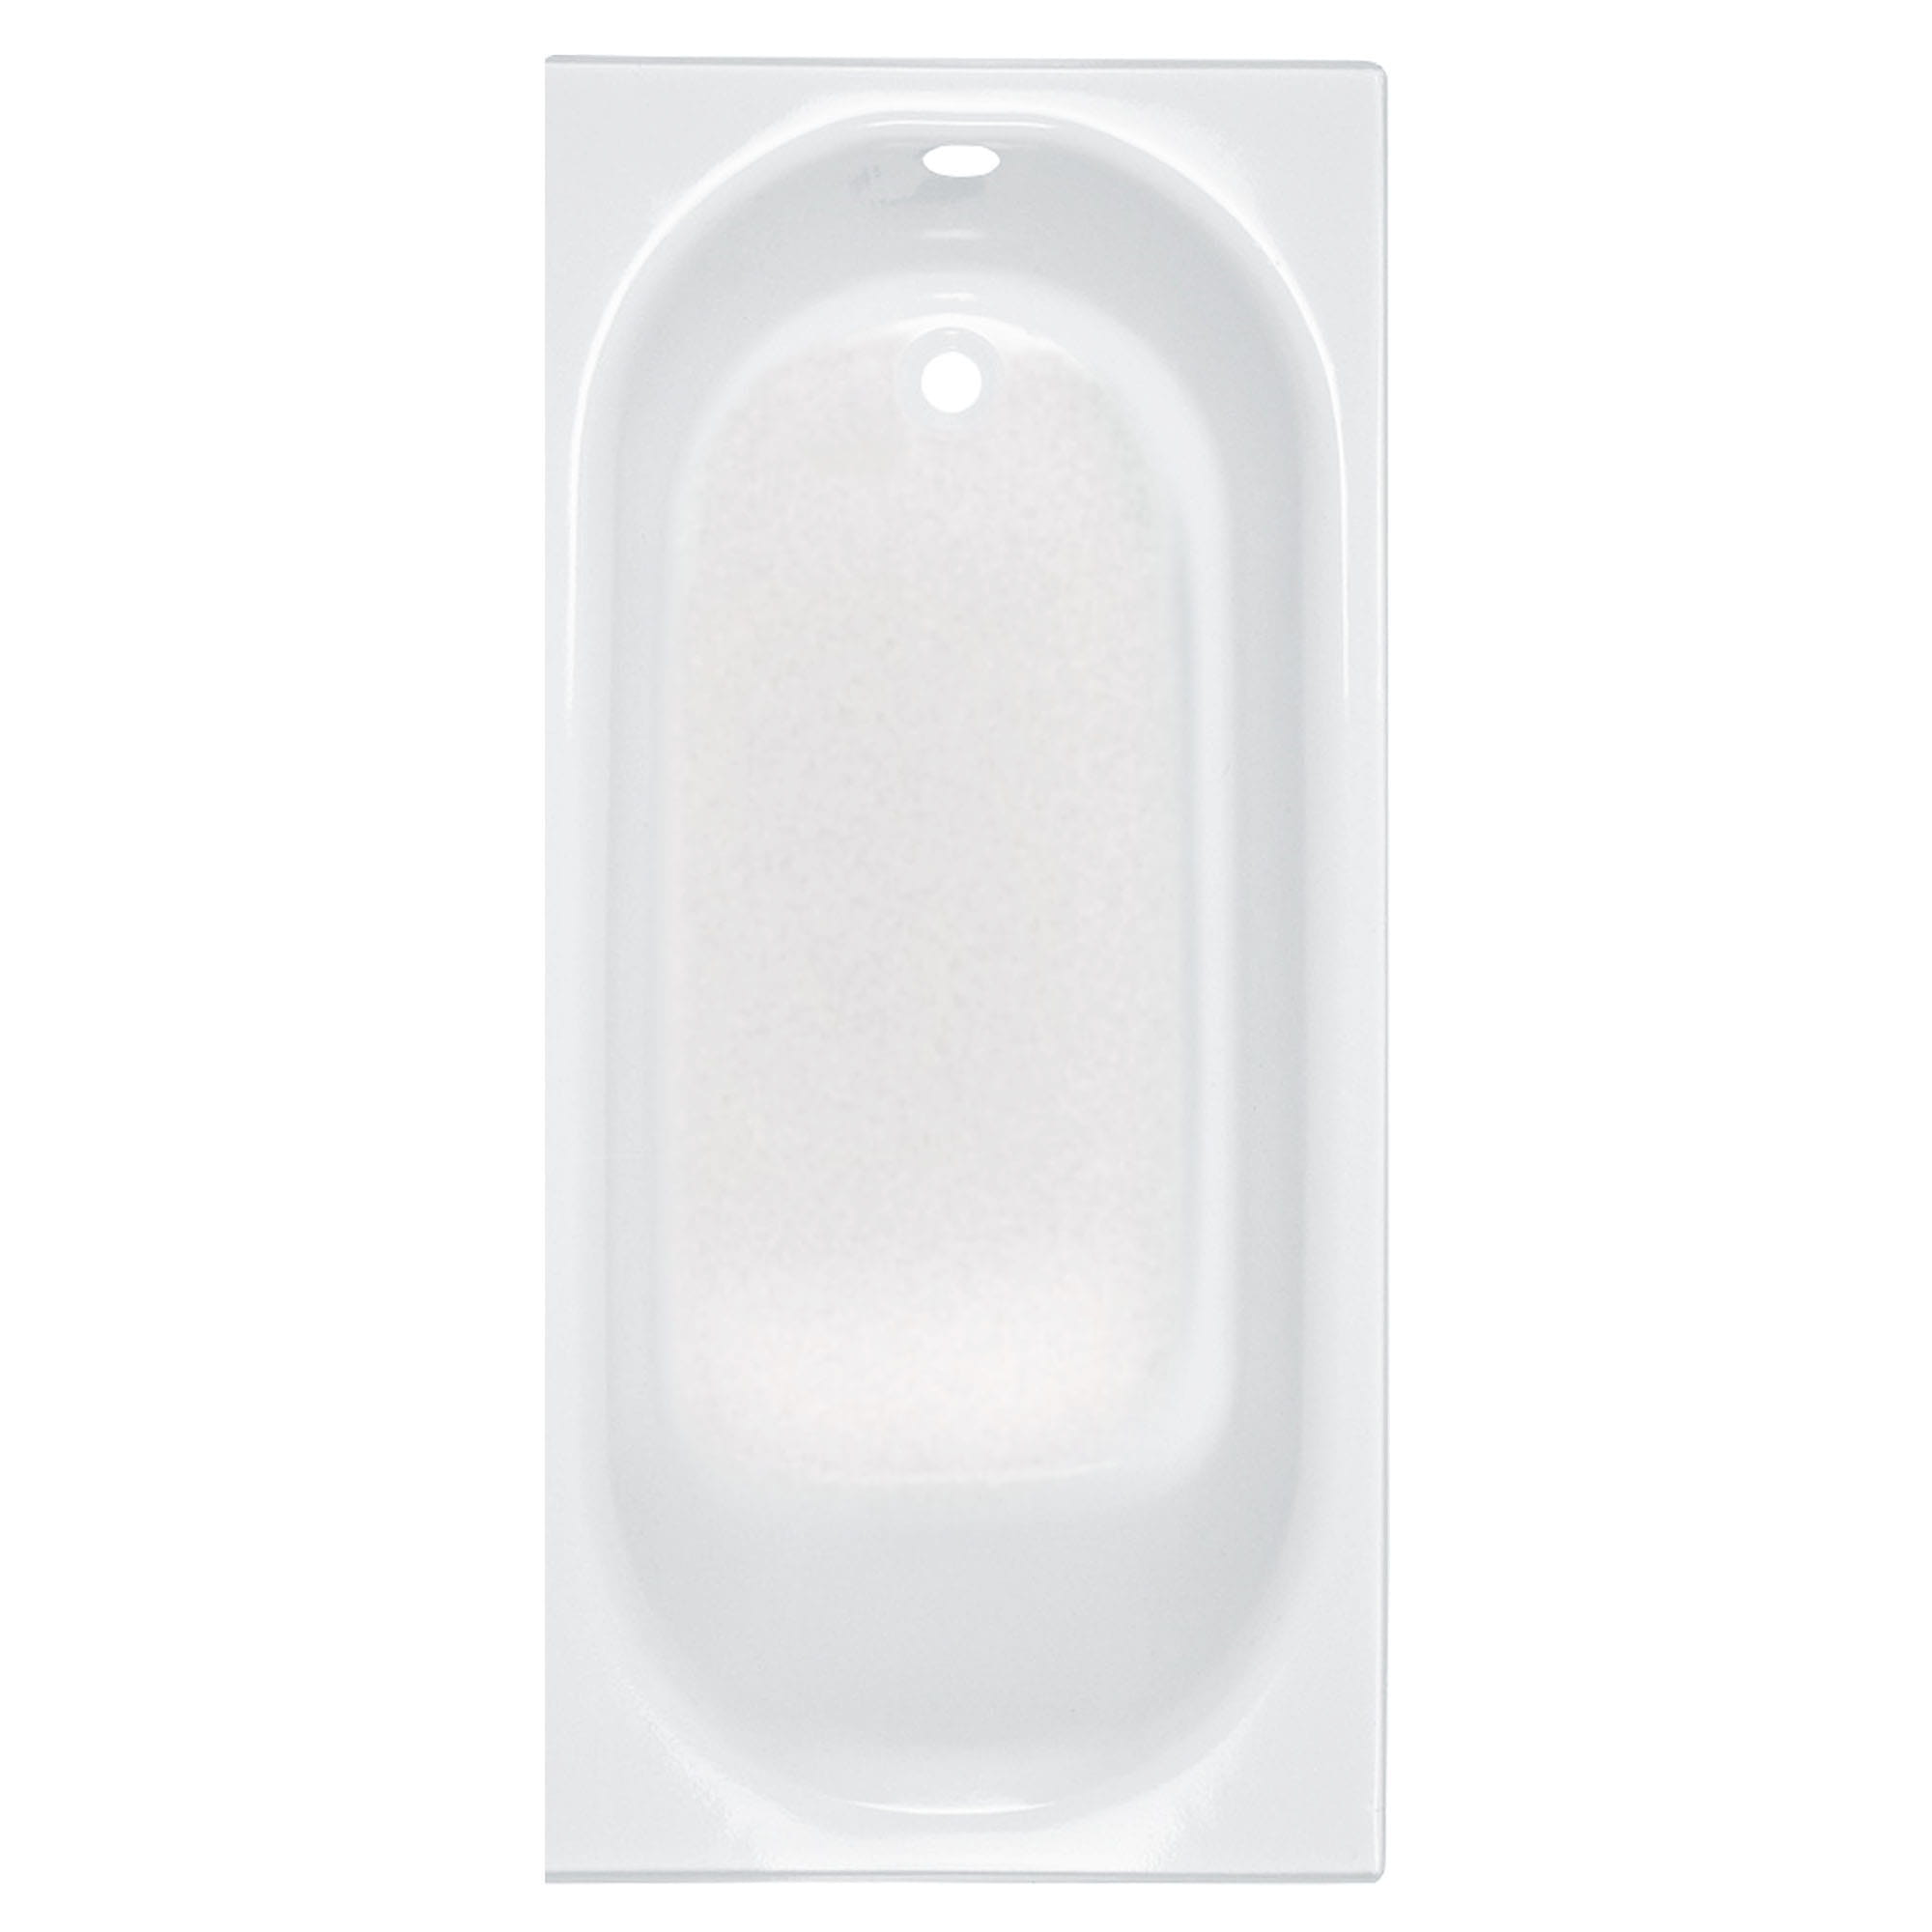 Princeton Americast 60 x 30 Inch Integral Apron Bathtub With Left Hand Outlet ARCTIC